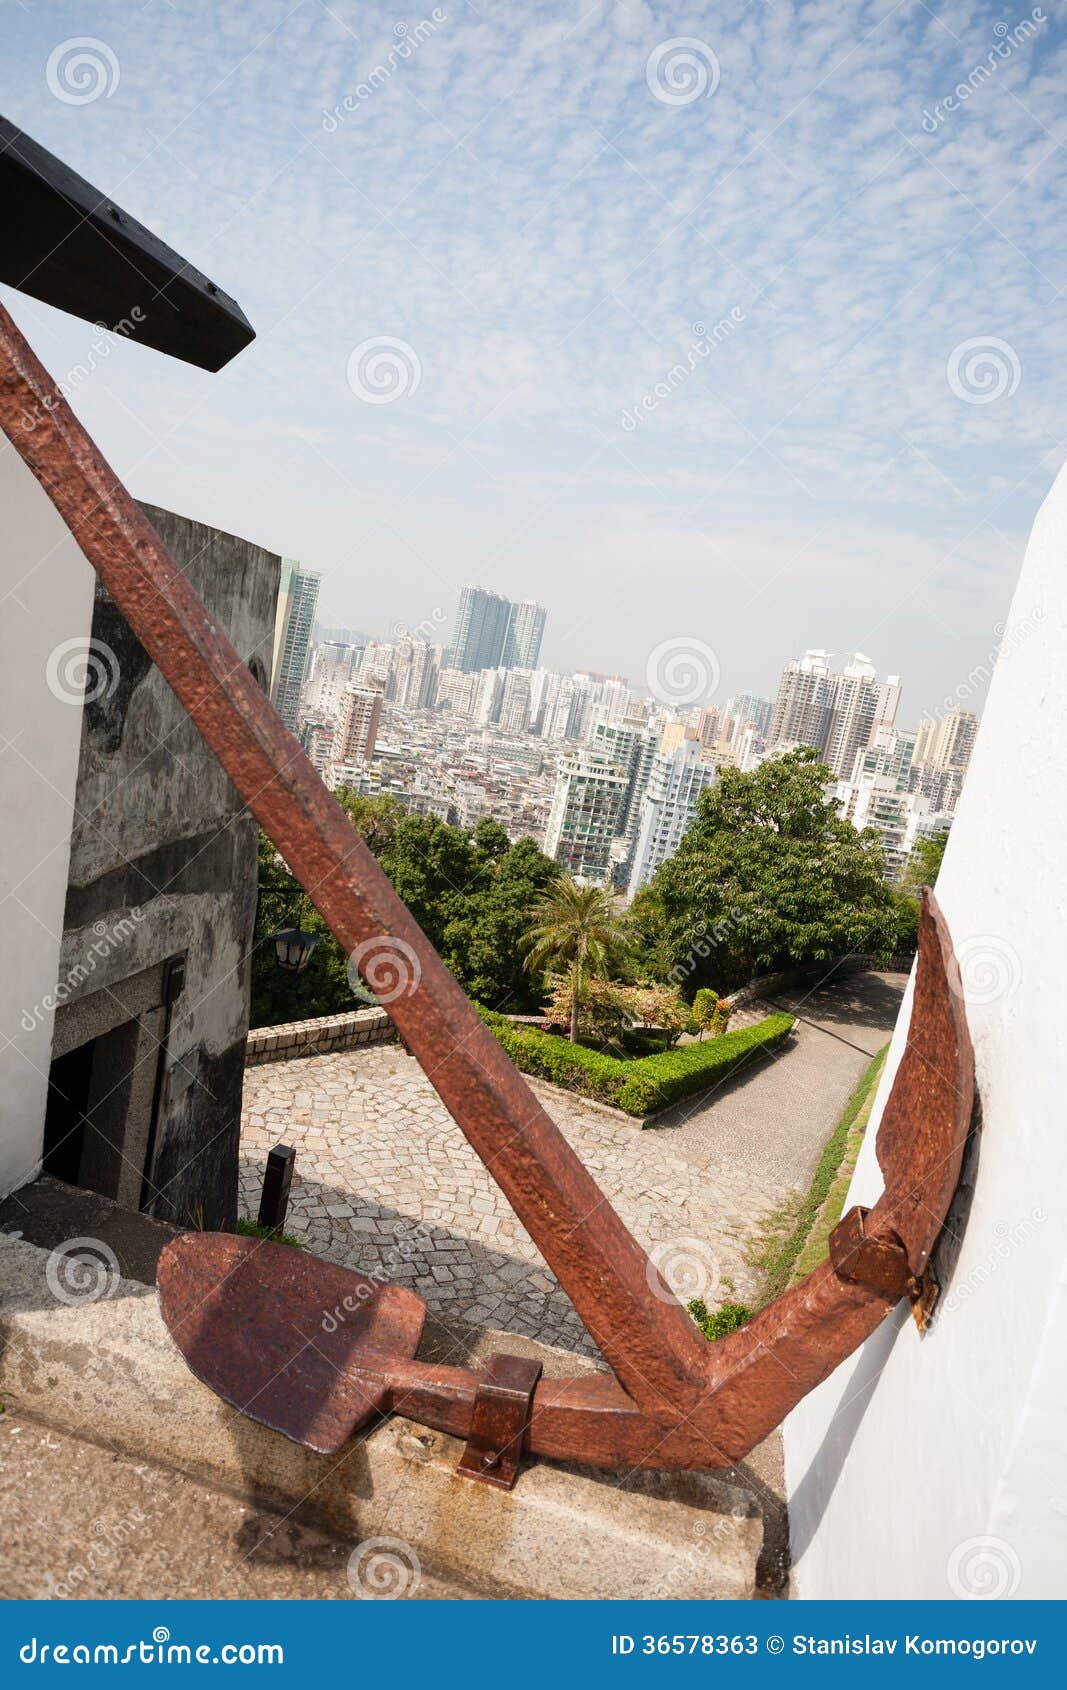 anchor at the guia lighthouse overlooking the macau